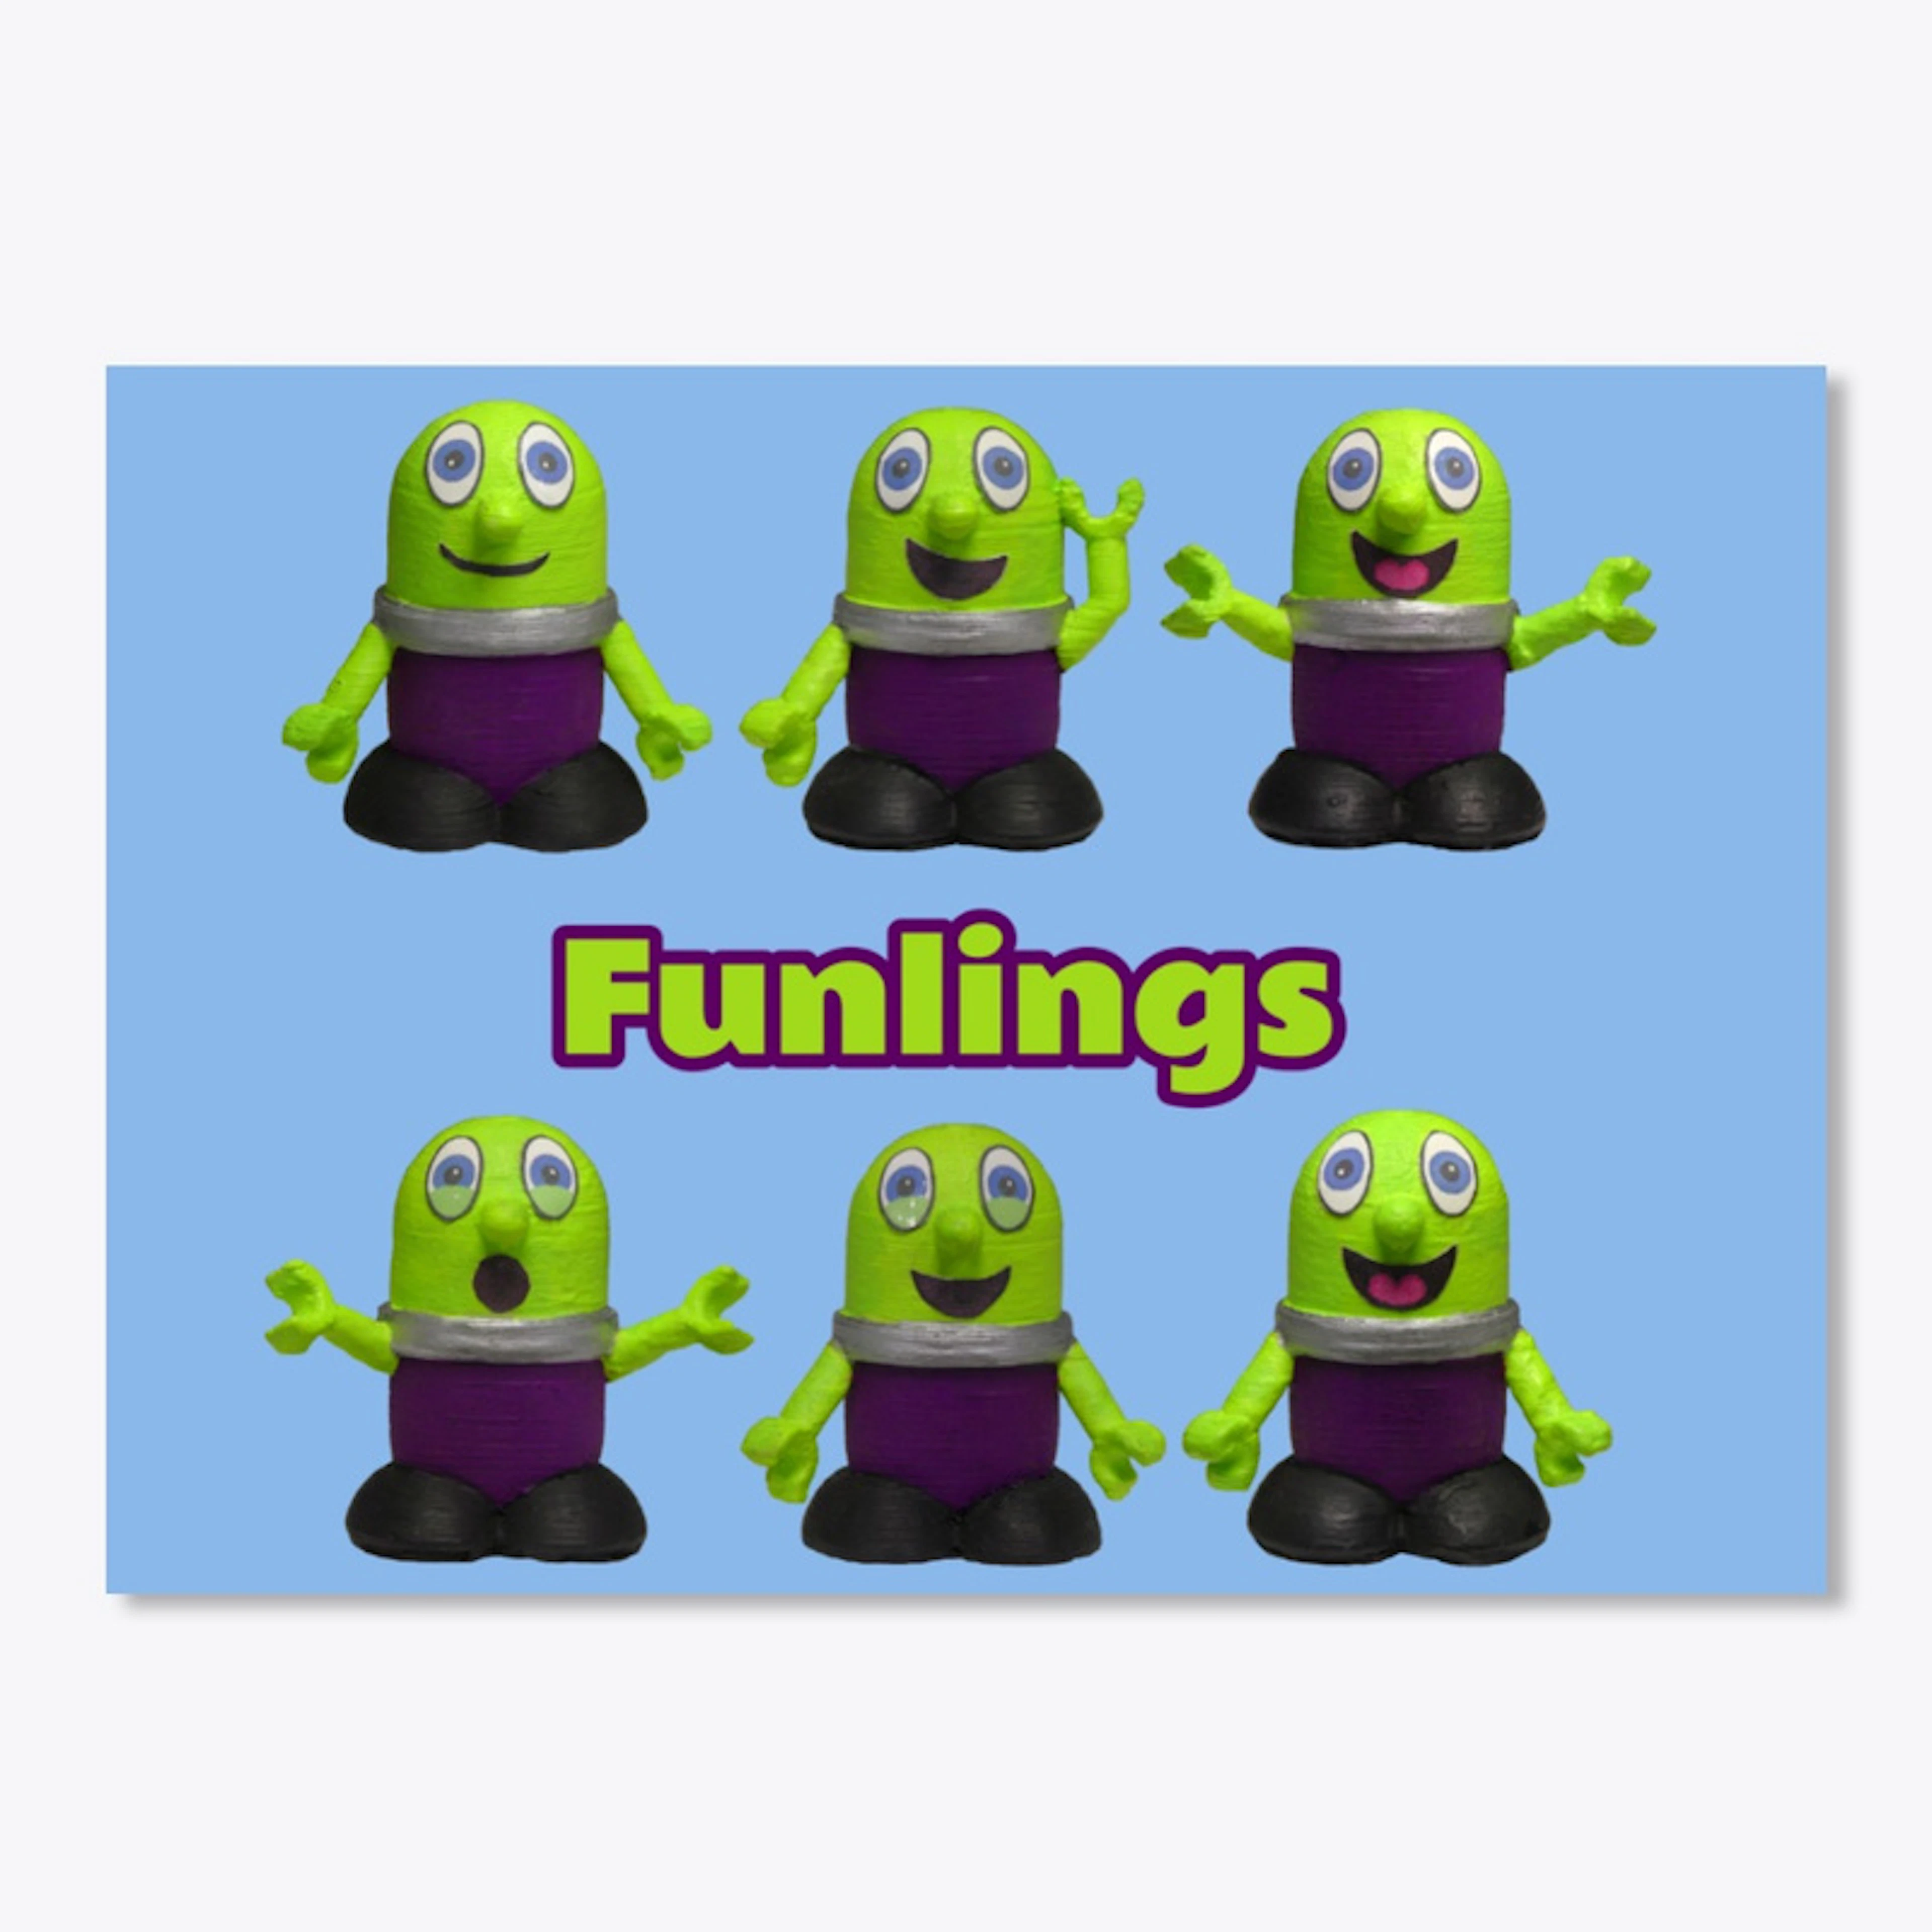 ✂ Cut Out Funlings Stickers ✂